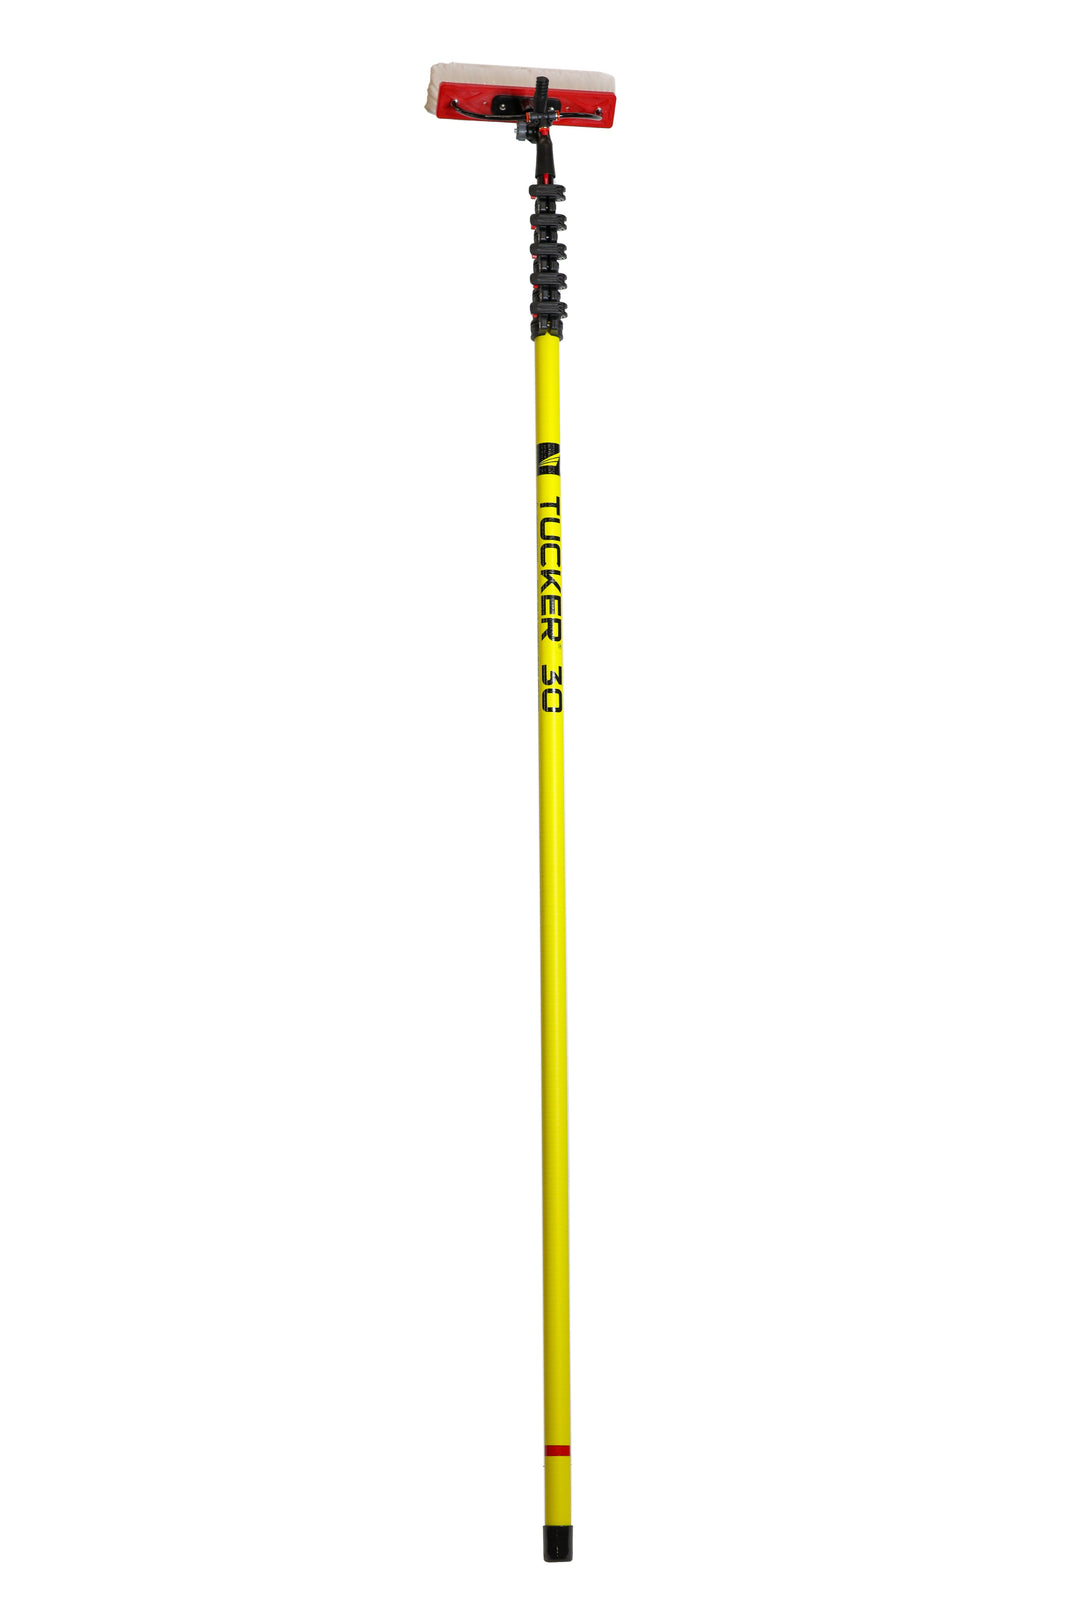 A complete water fed cleaning pole with the brand 'TUCKER 30' printed on the yellow shaft, featuring a red and white brush head attached to a black gooseneck.